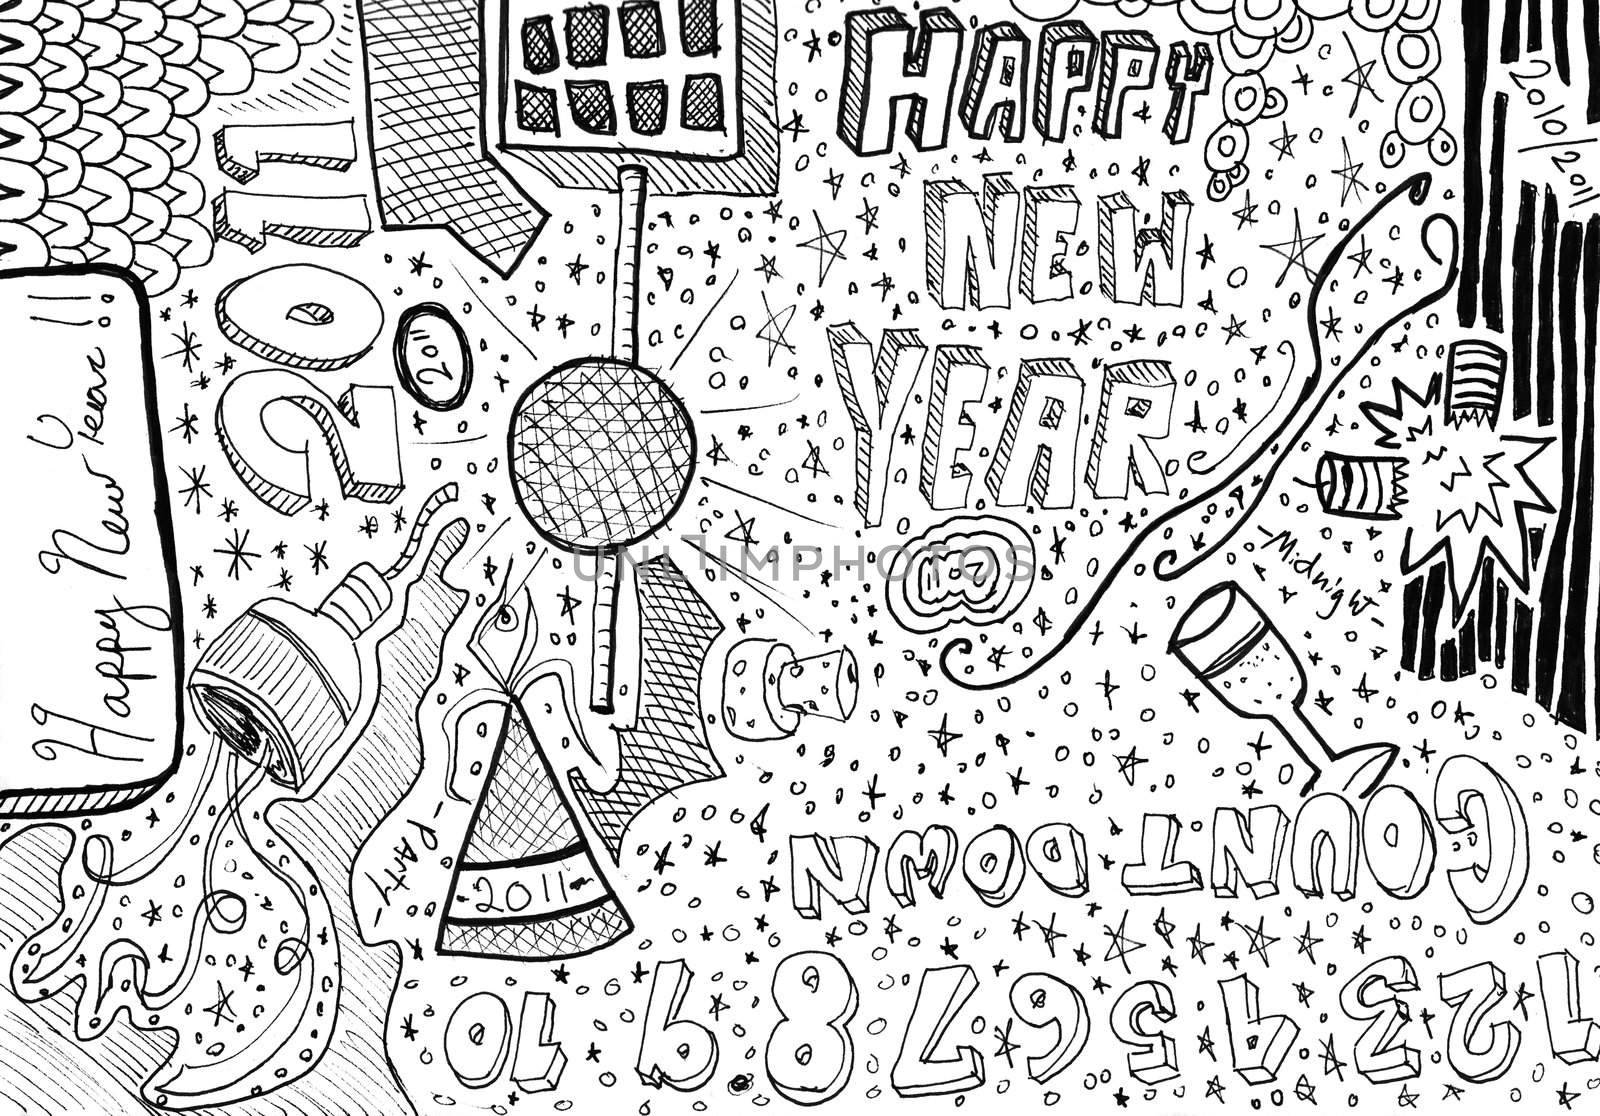 Happy new years doodles by jeremywhat